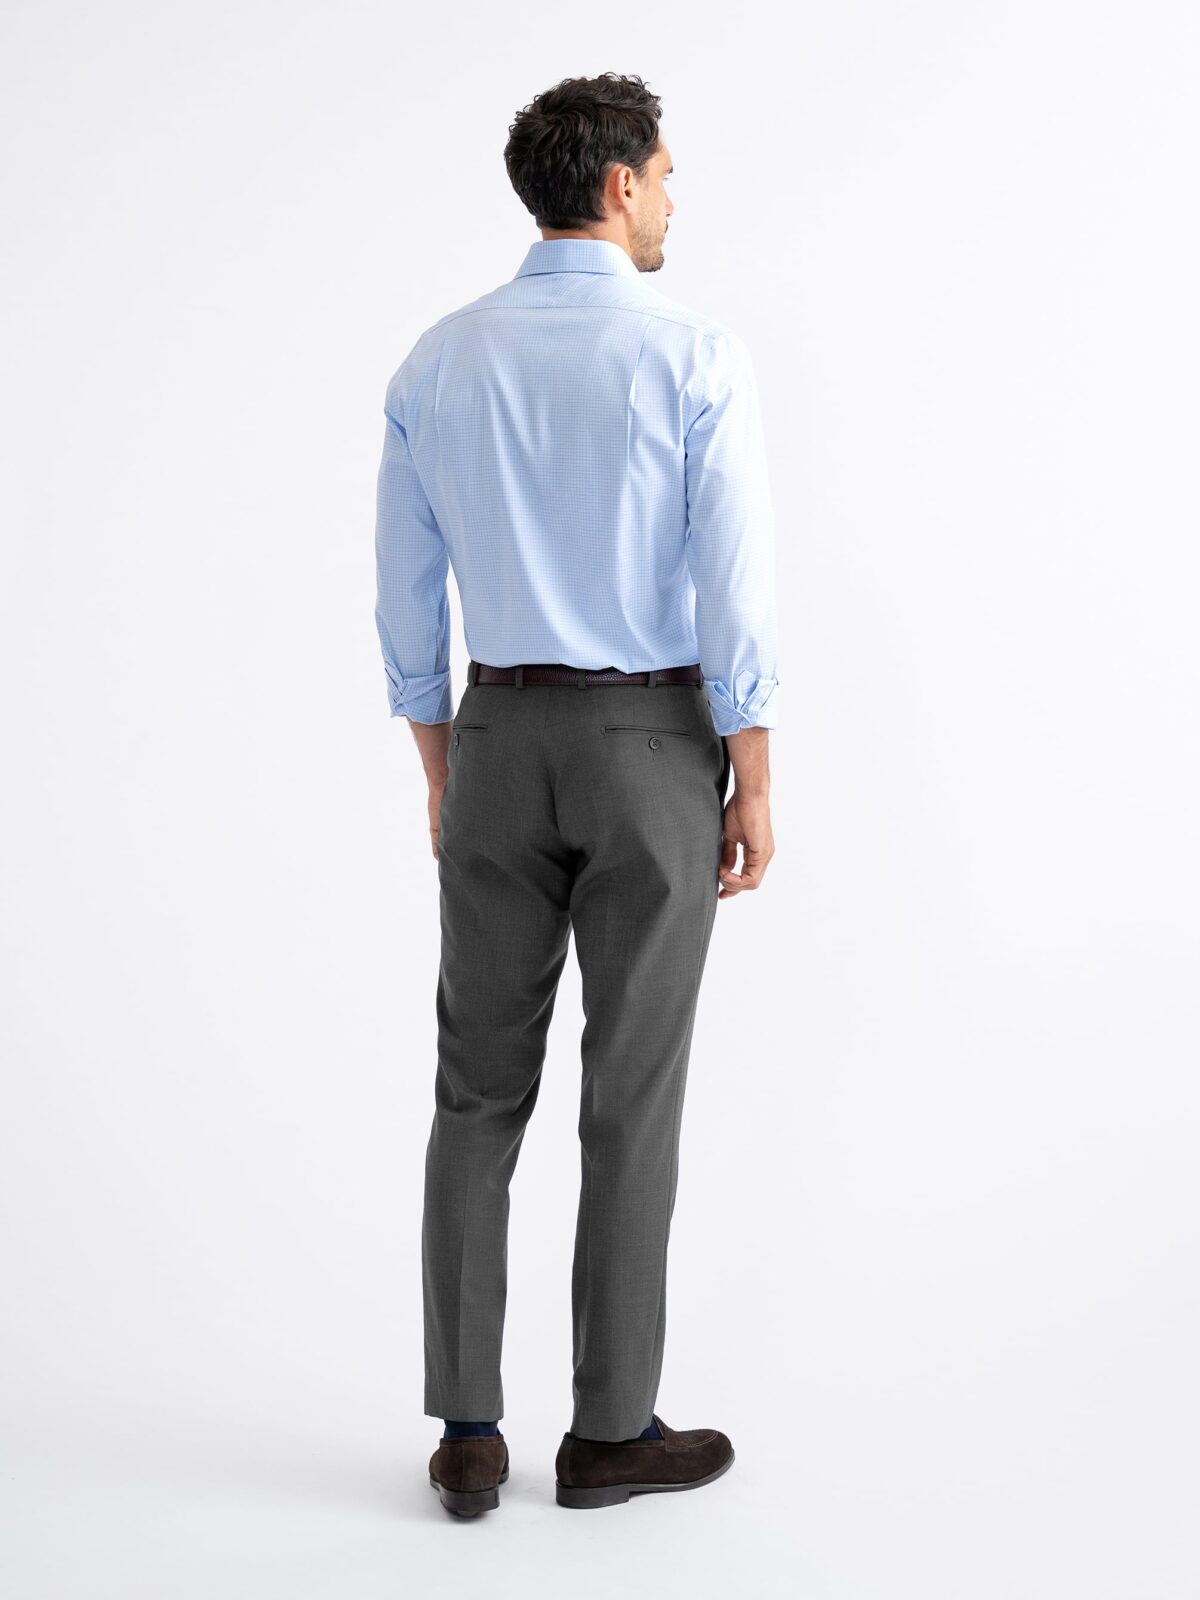 Grey Wool Stretch Dress Pant - Custom Fit Tailored Clothing